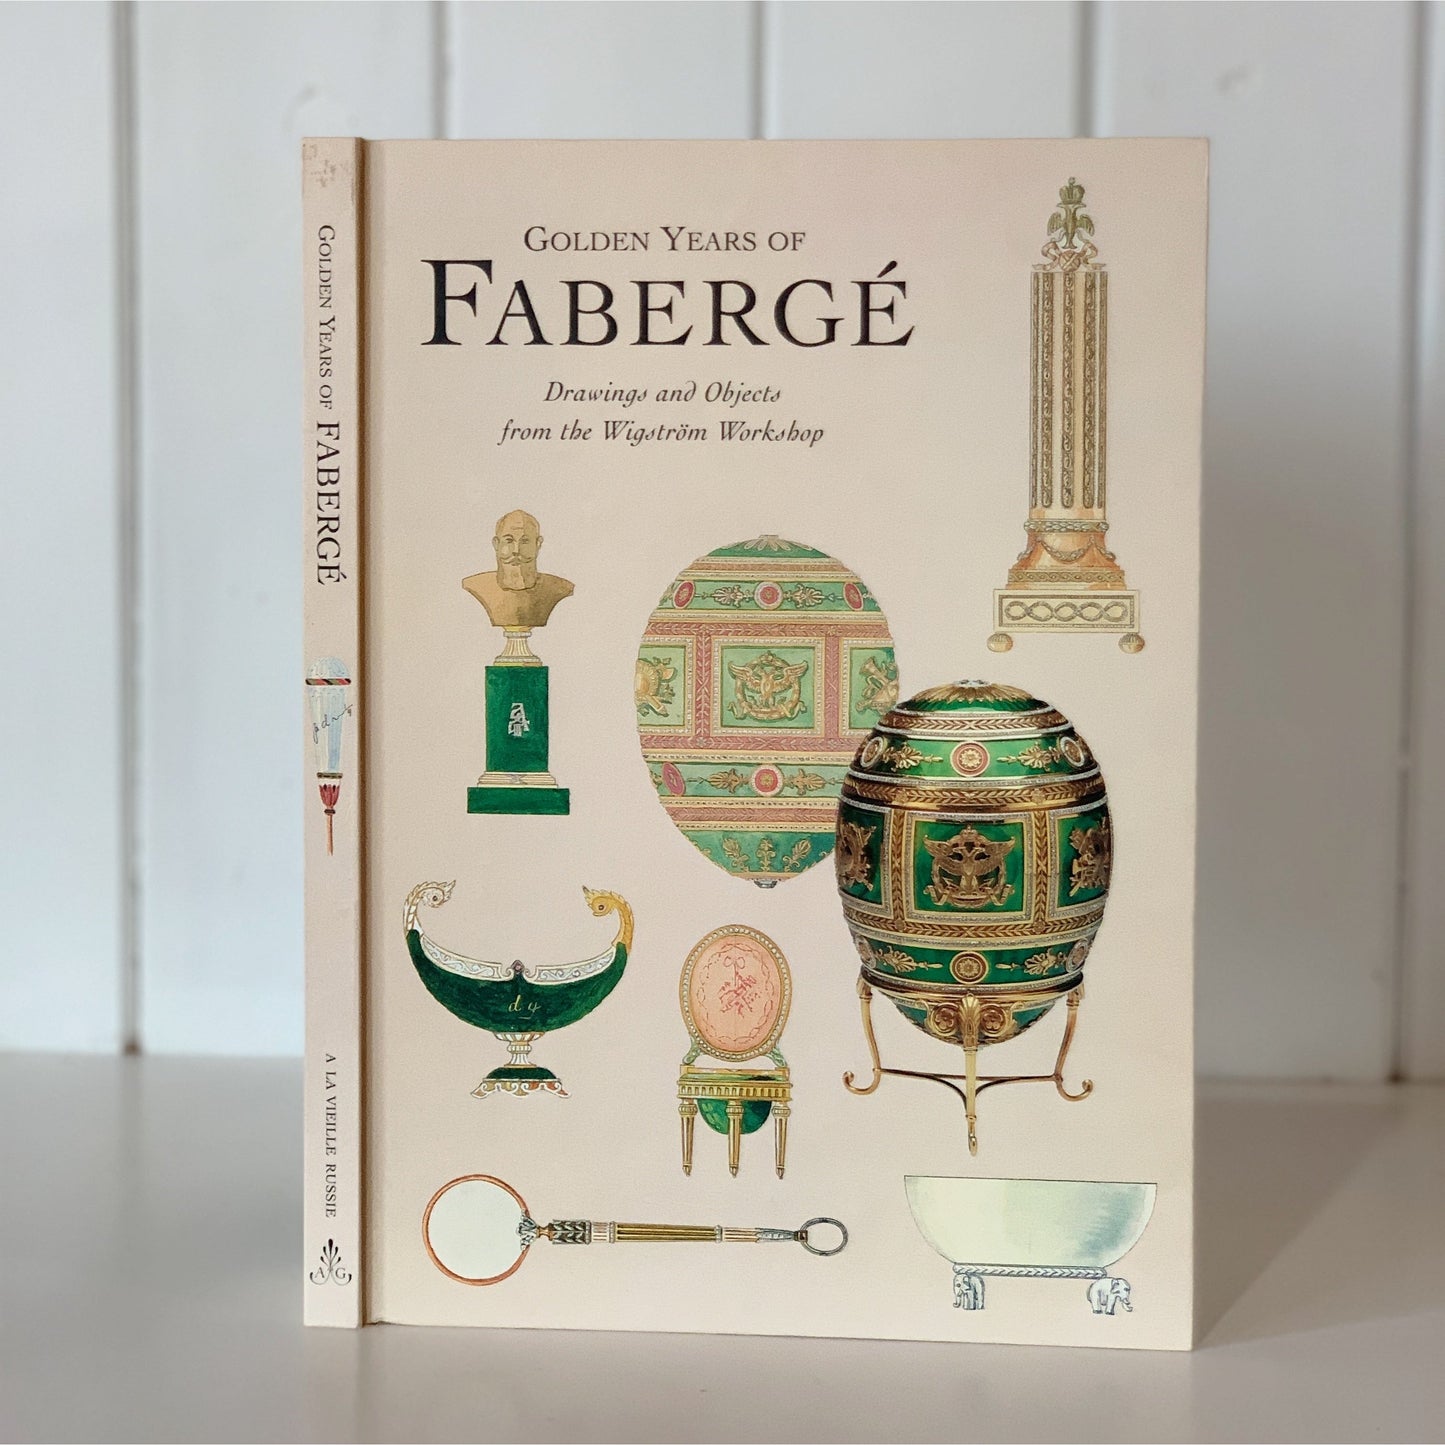 Golden Years of Faberge Slipcased Coffee Table Book, Hardcover, 2000